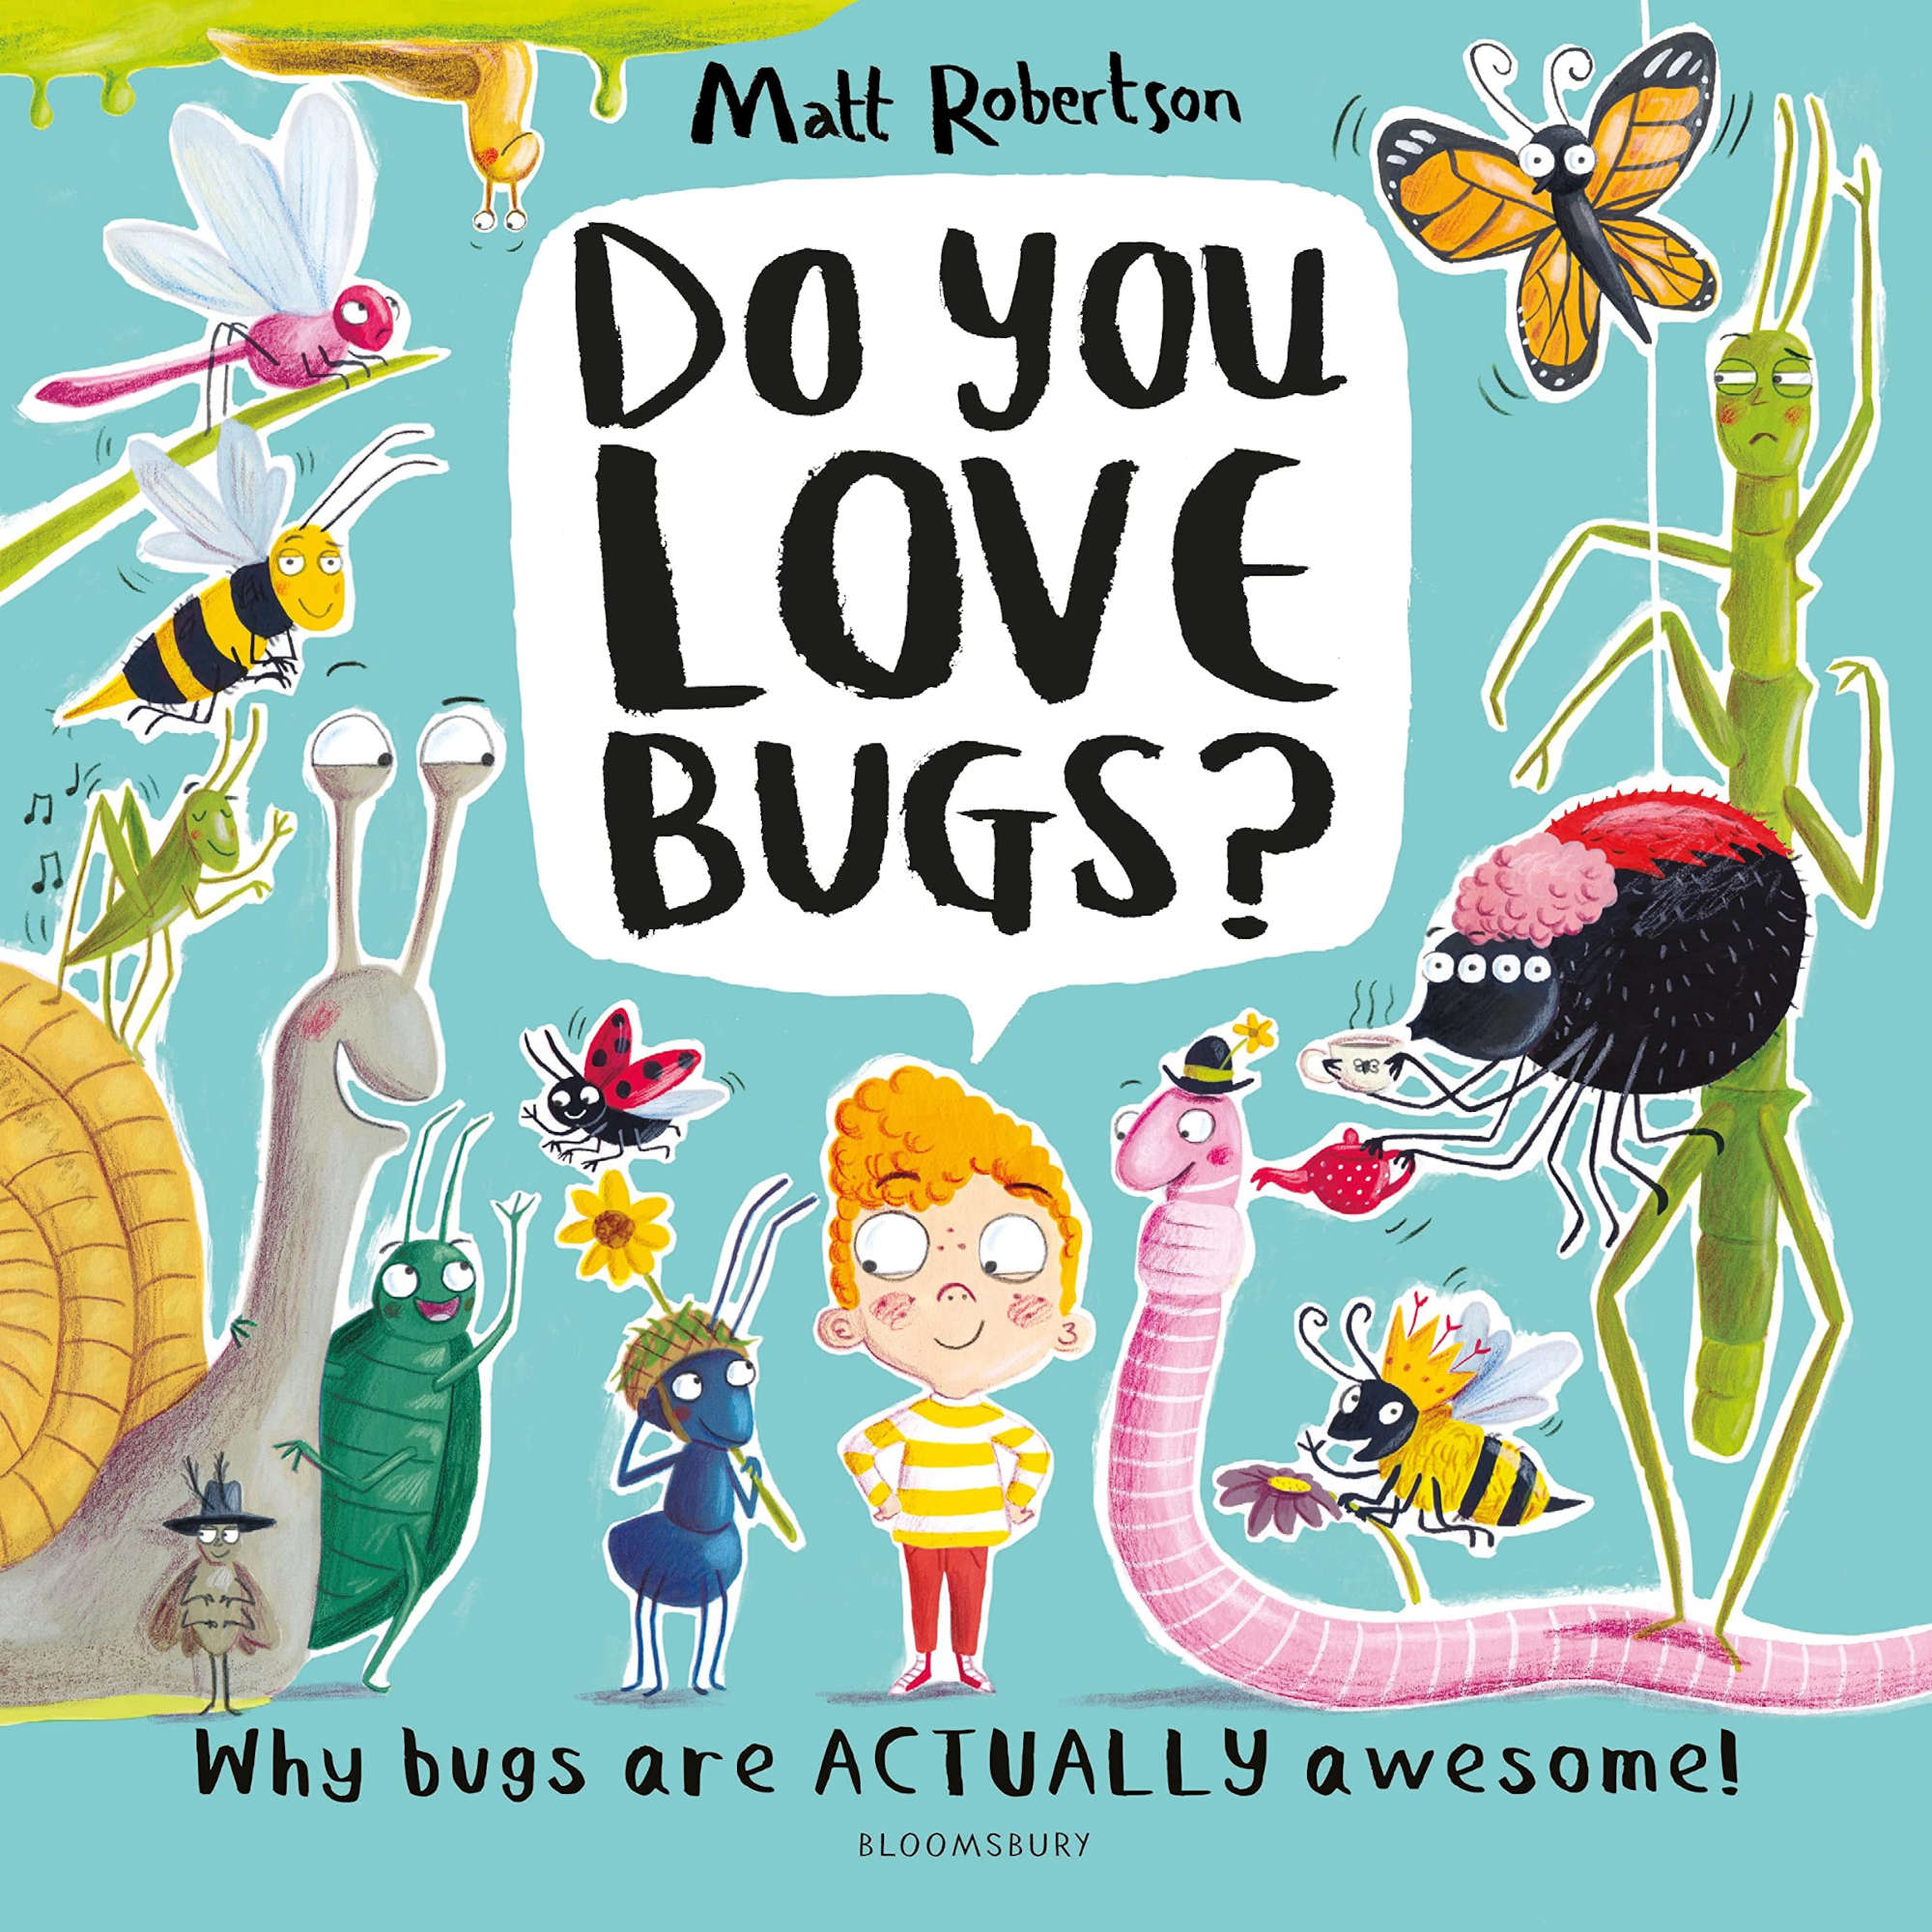 Little　crawliest　creepiest,　The　Love　My　in　the　J　world　book　Do　Bugs?　You　–